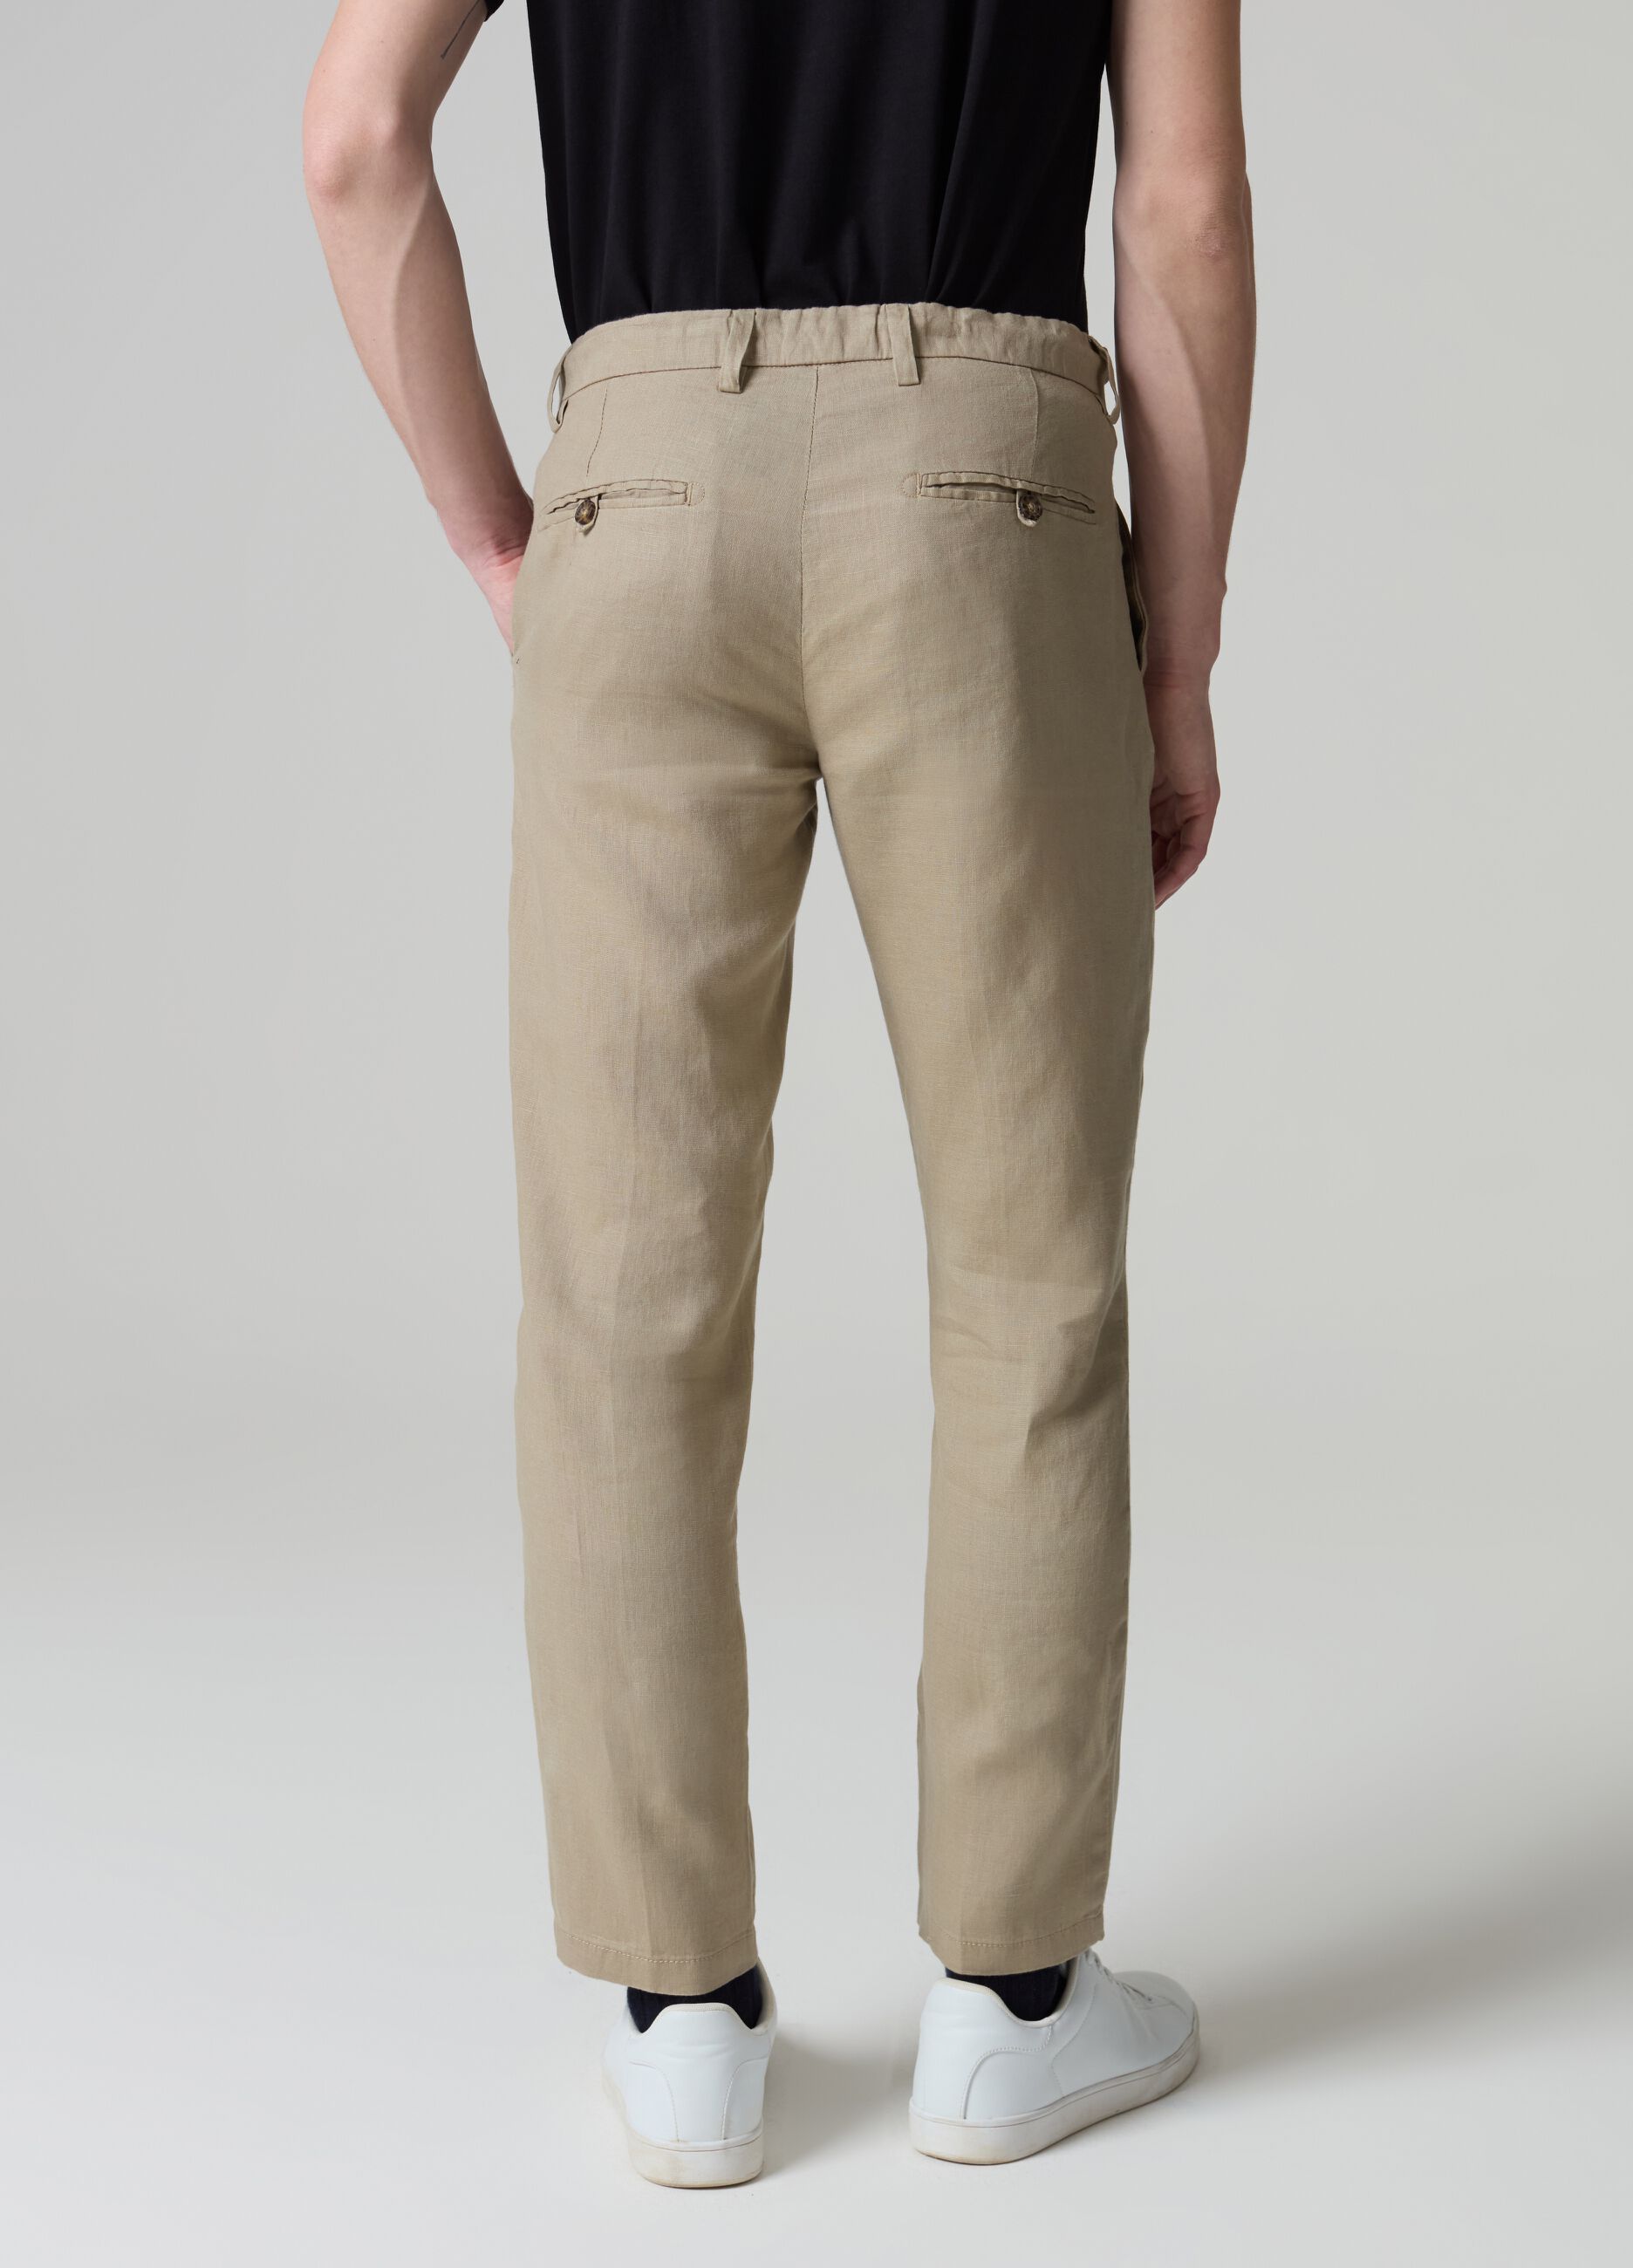 Pantalone chino in lino con coulisse